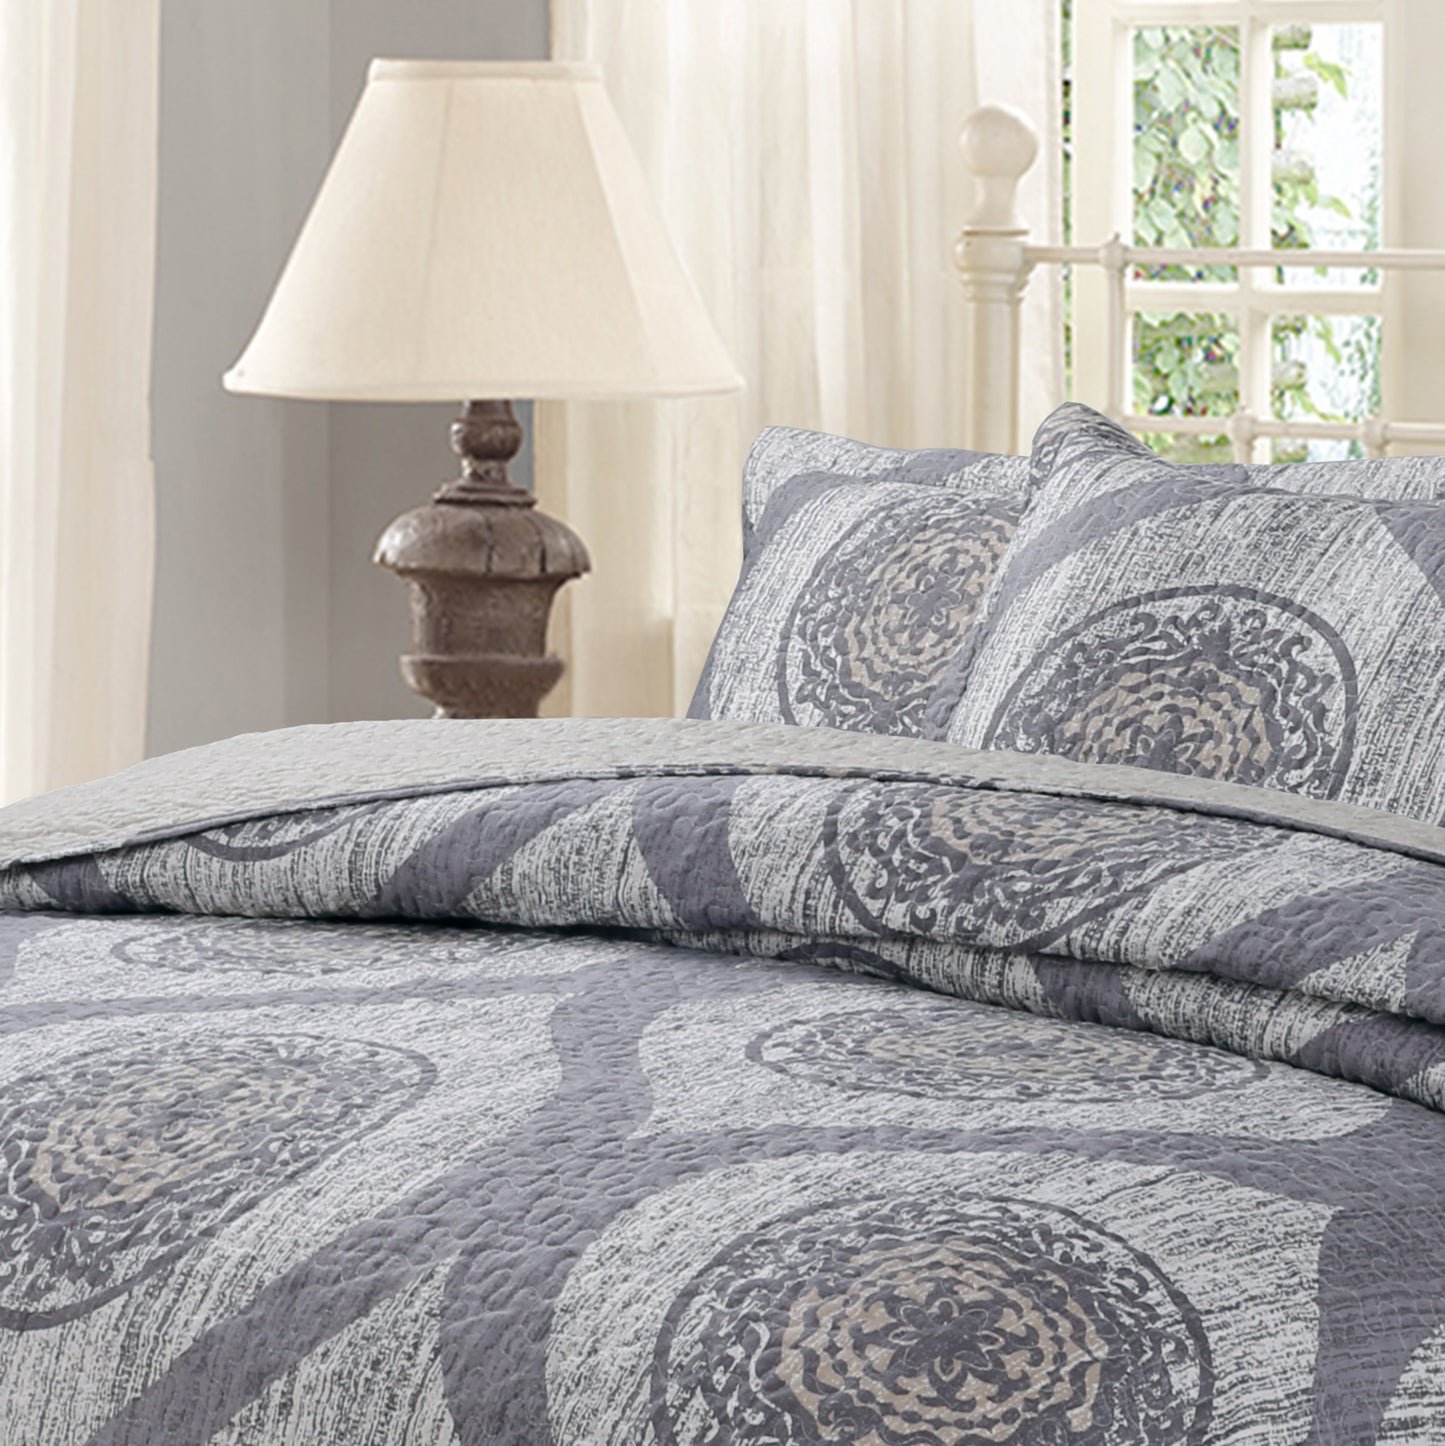 Cool Grey Mosaic Floral Medallion Reversible Quilted Coverlet Bedspread Set (SD16299)